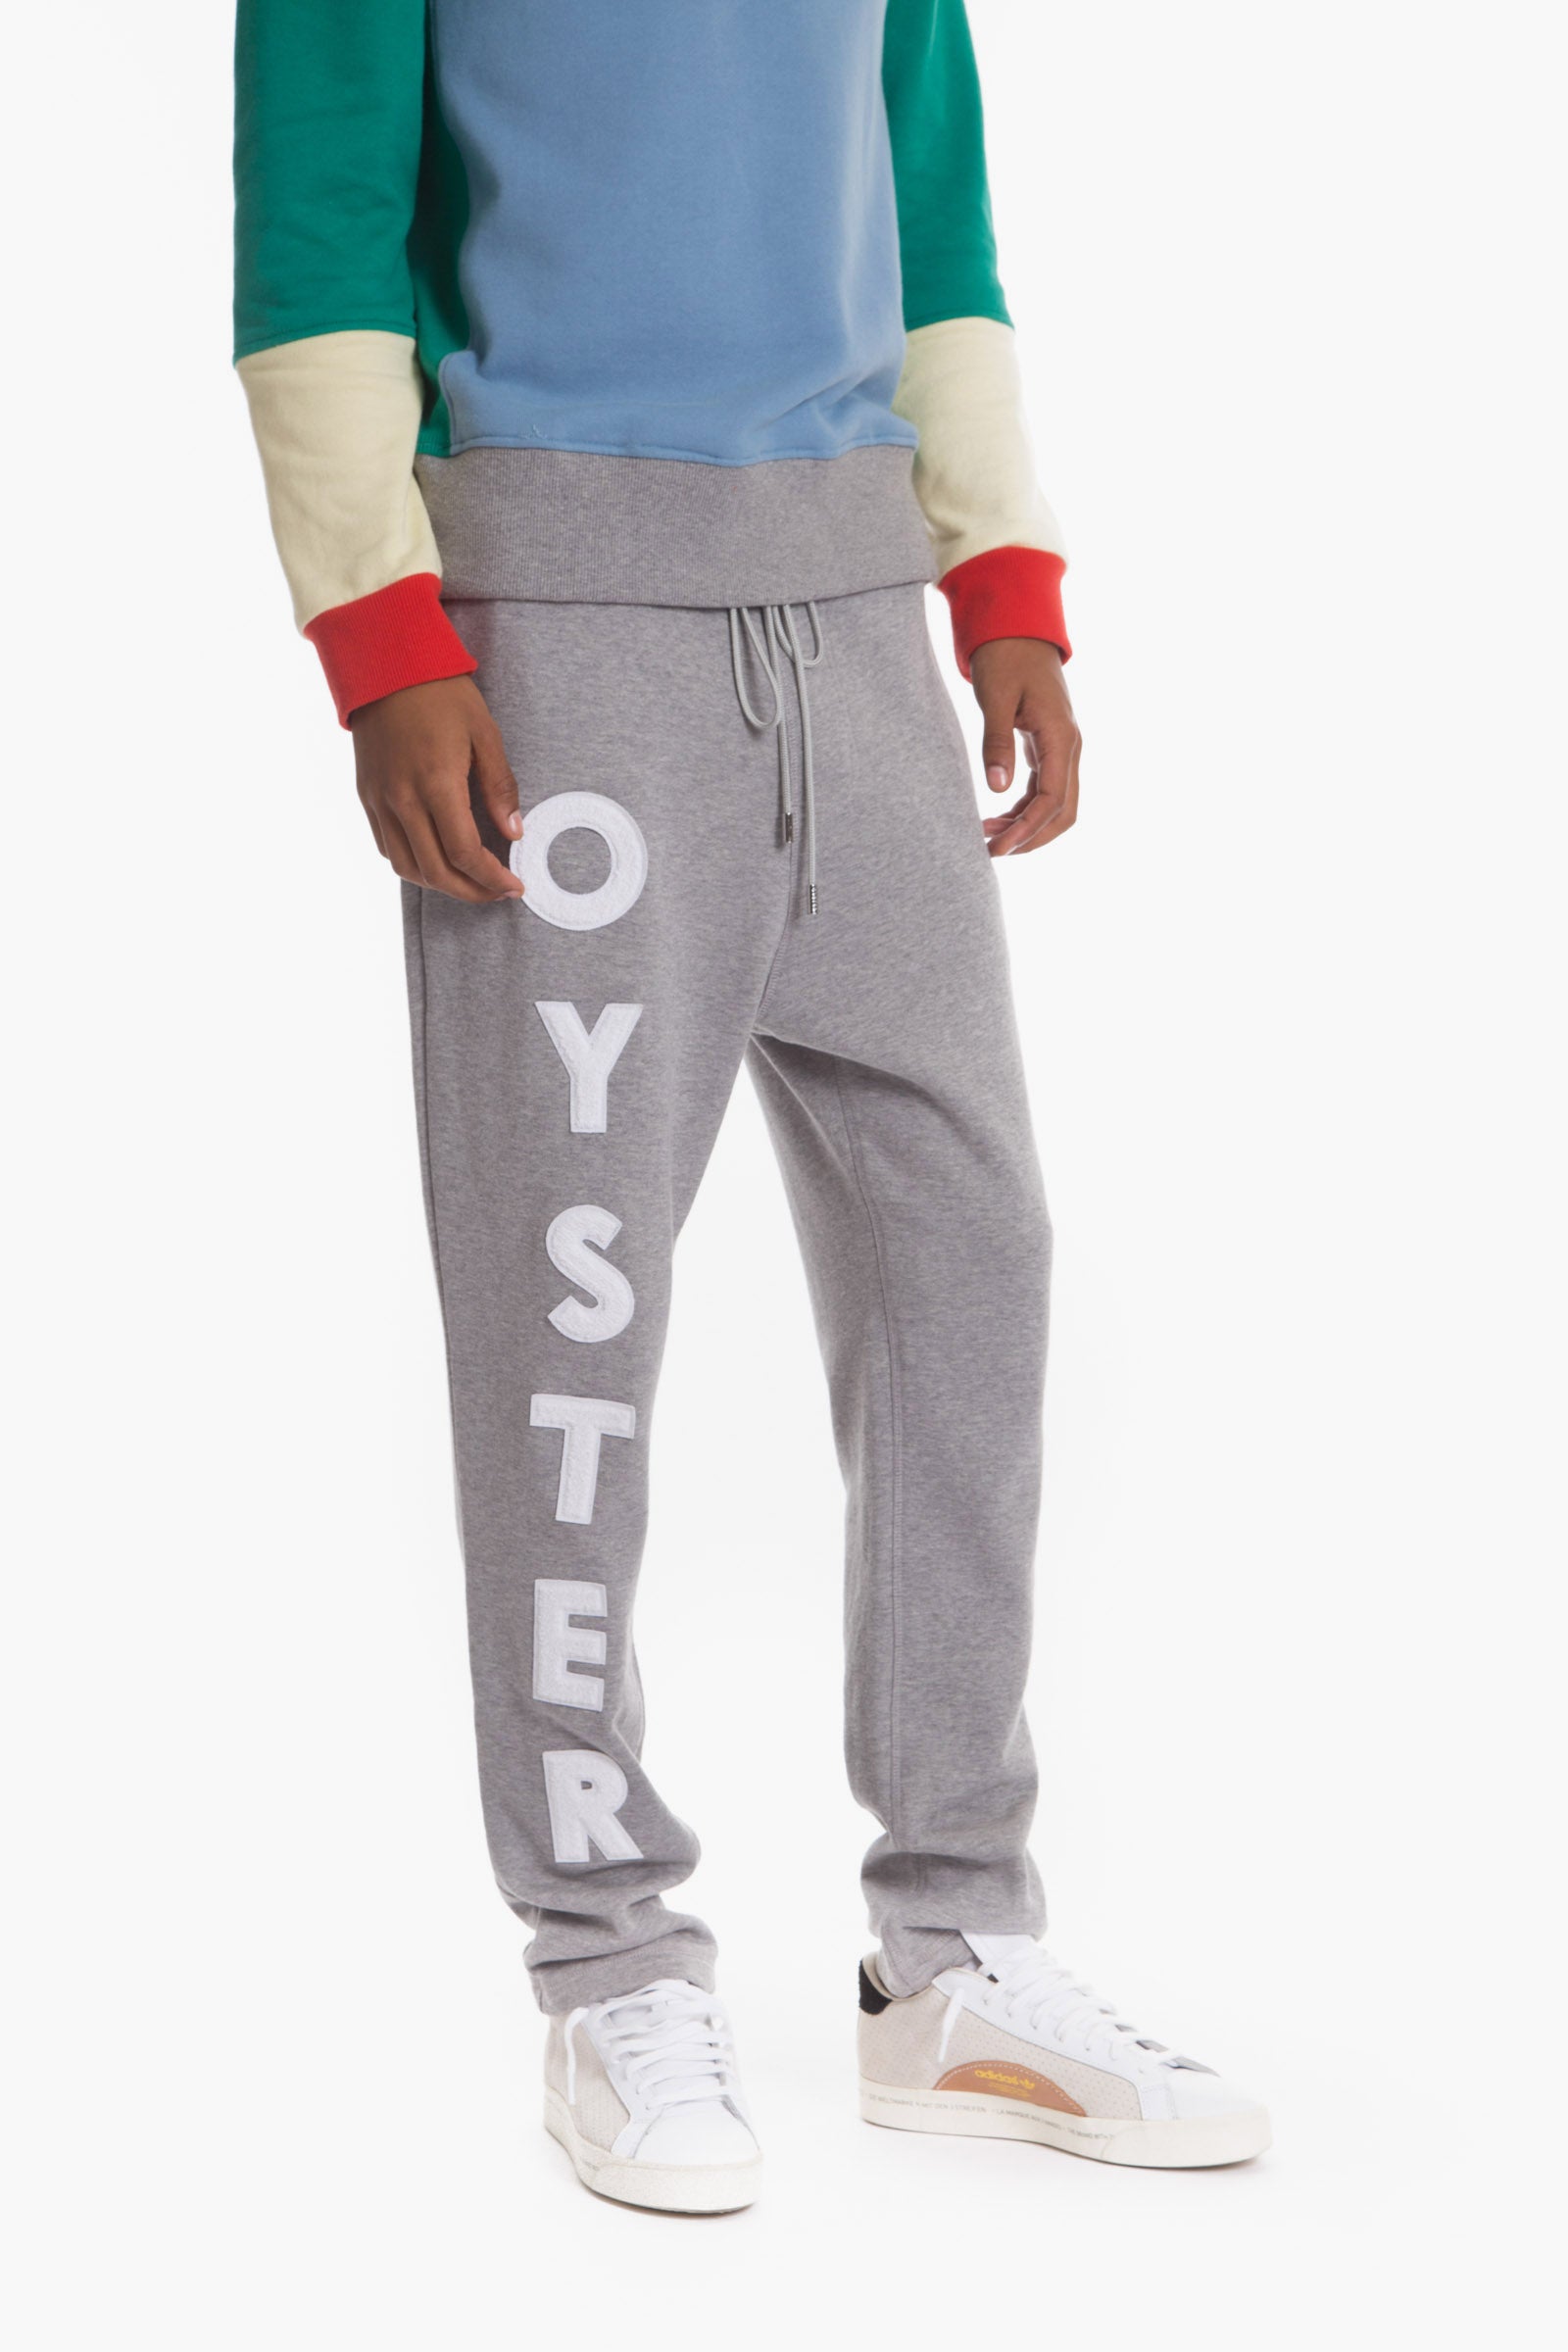 Grey Sweatpants with pockets and drawstring | ridgefieldboosters